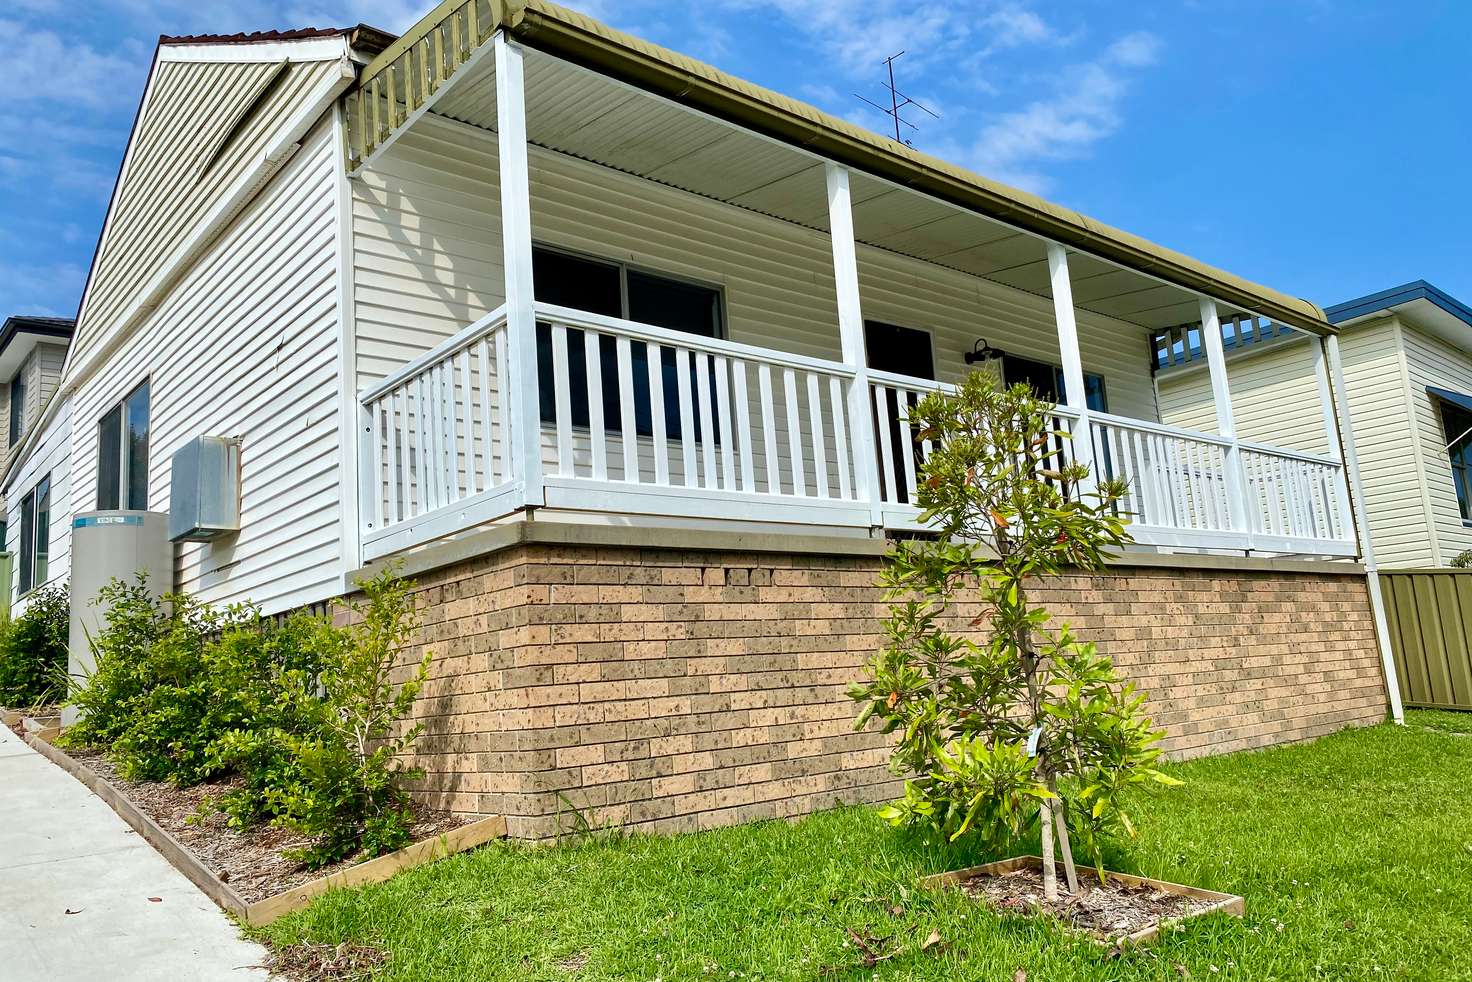 Main view of Homely house listing, 11 Rushton Street, Wallsend NSW 2287